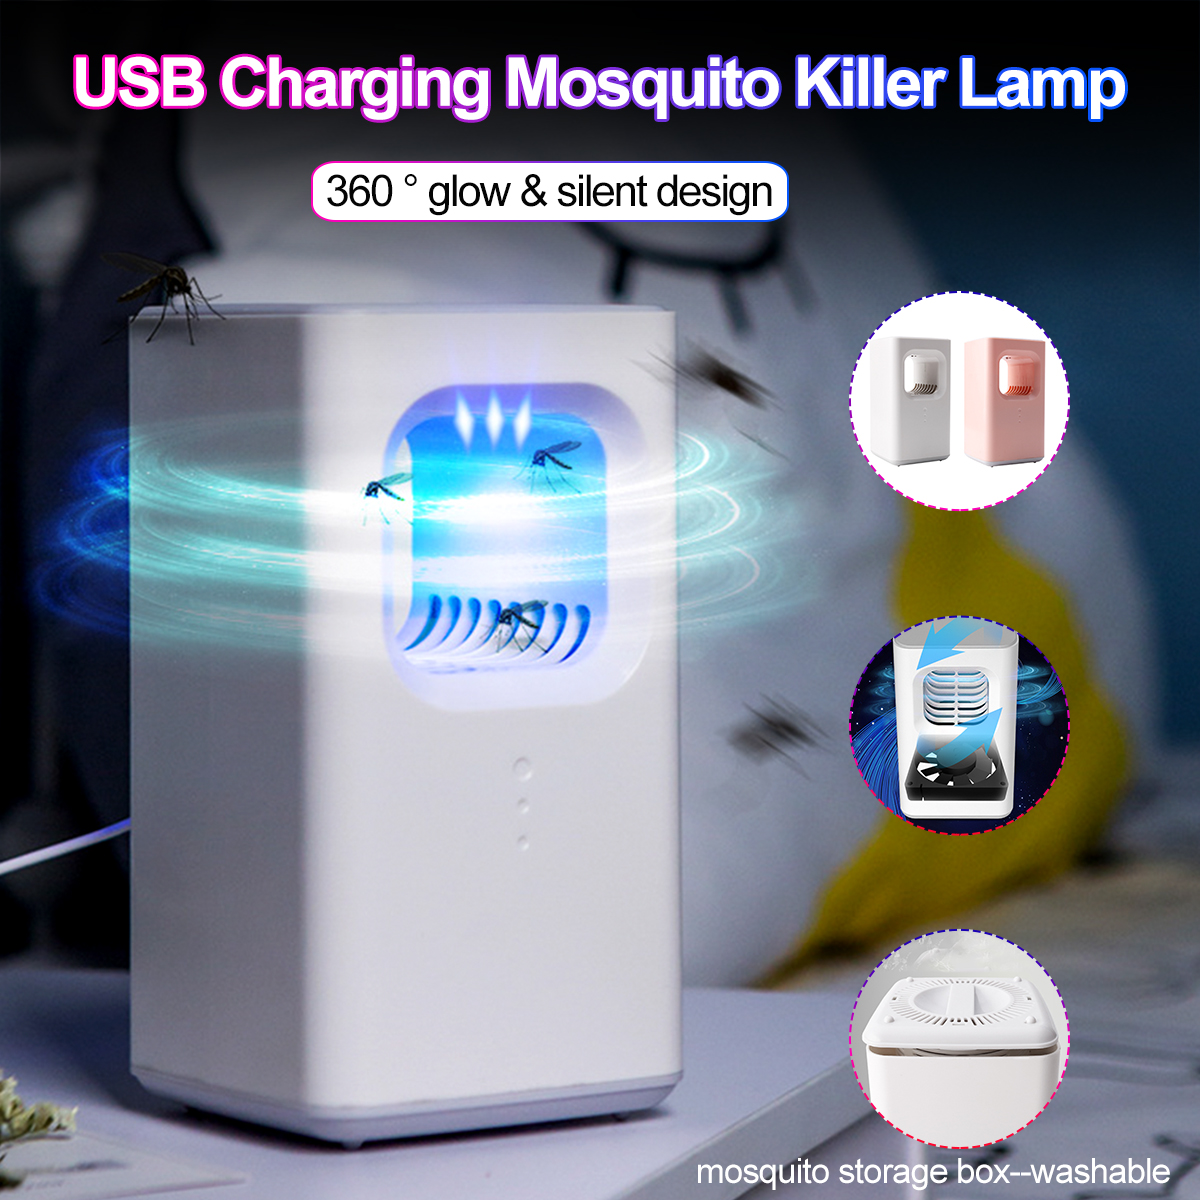 Mosquito-Killer-Lamp-USB-Low-Noise-Insect-Repellent-Mosquito-Dispeller-For-Home-Hotel-Office-1650186-1